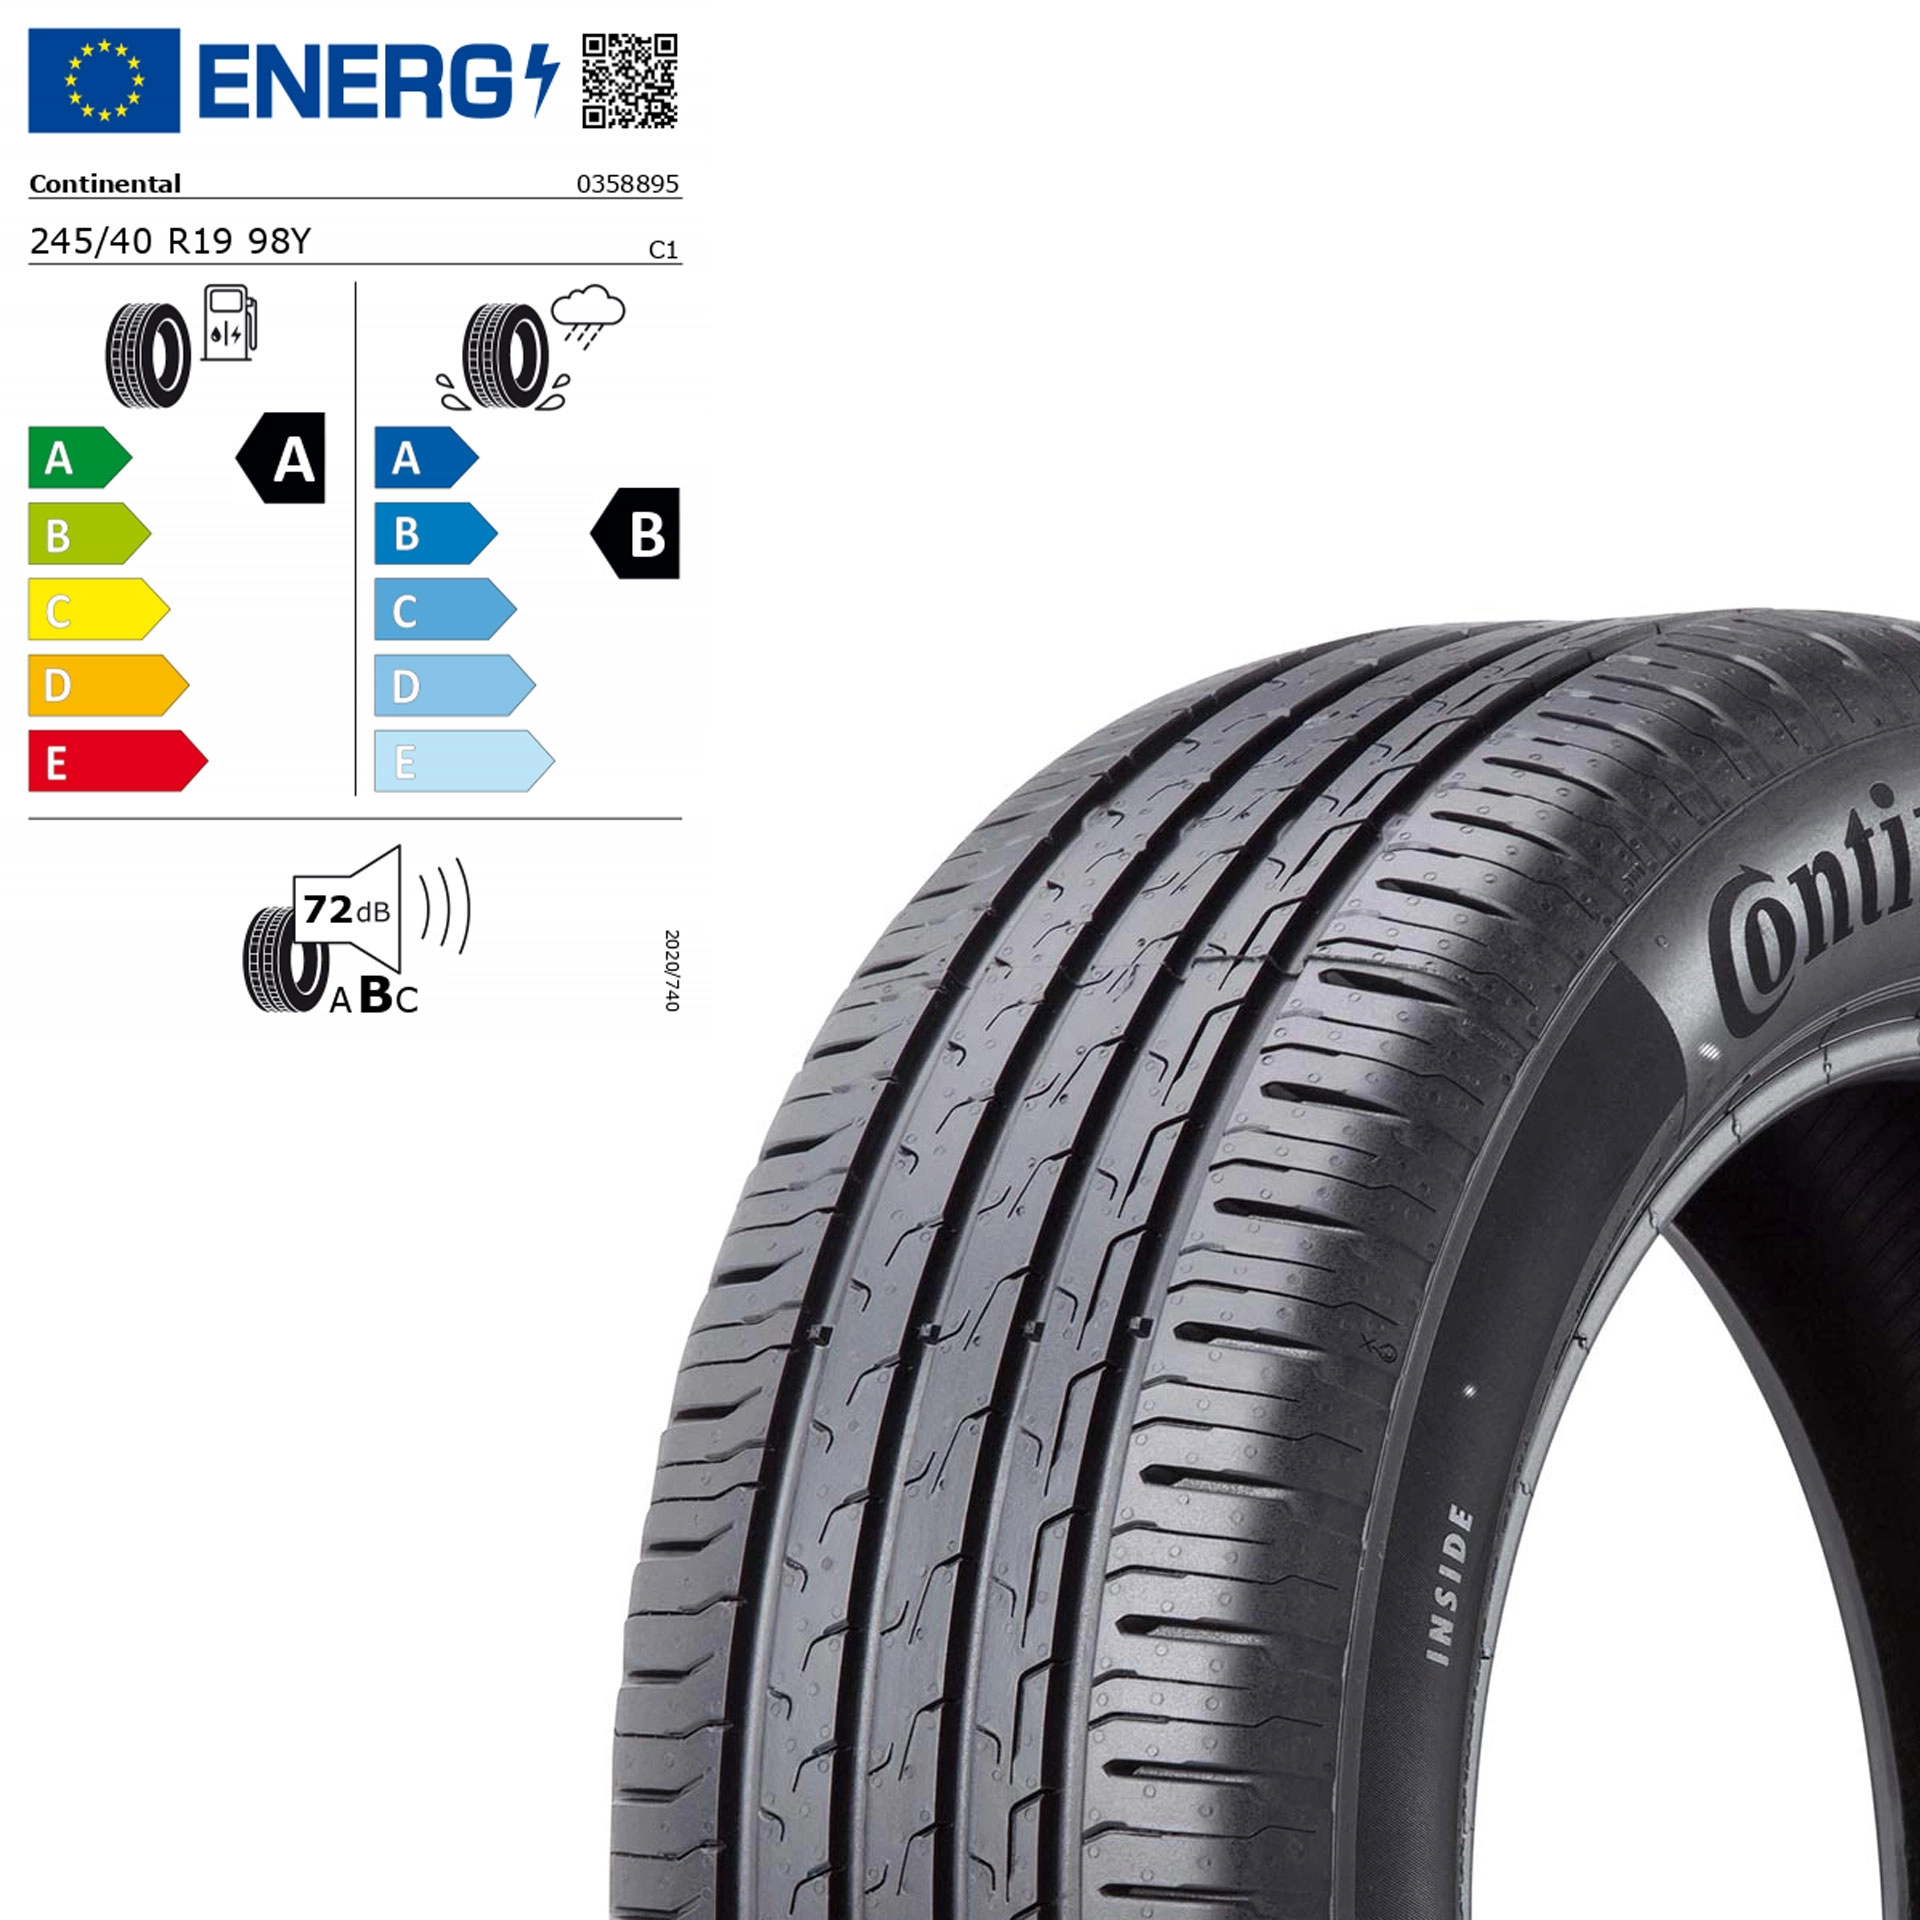 245/40 R19 98Y Continental EcoContact 6 MO Sommerreifen Q44001111282A